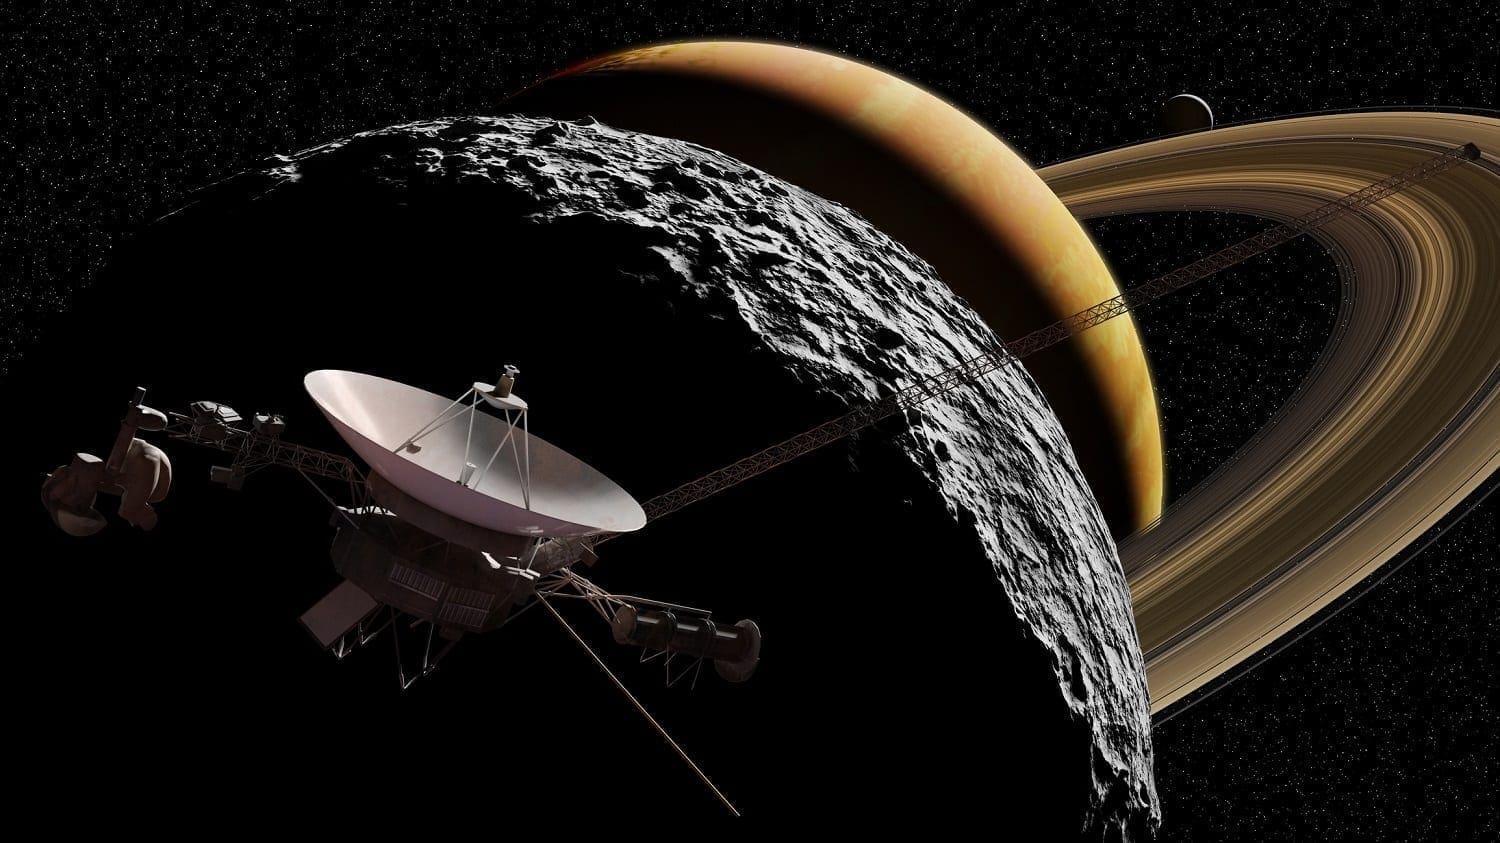 Voyager 2 with renderings of outer solar system objects: ID 131298149 © Planetfelicity | Dreamstime.com